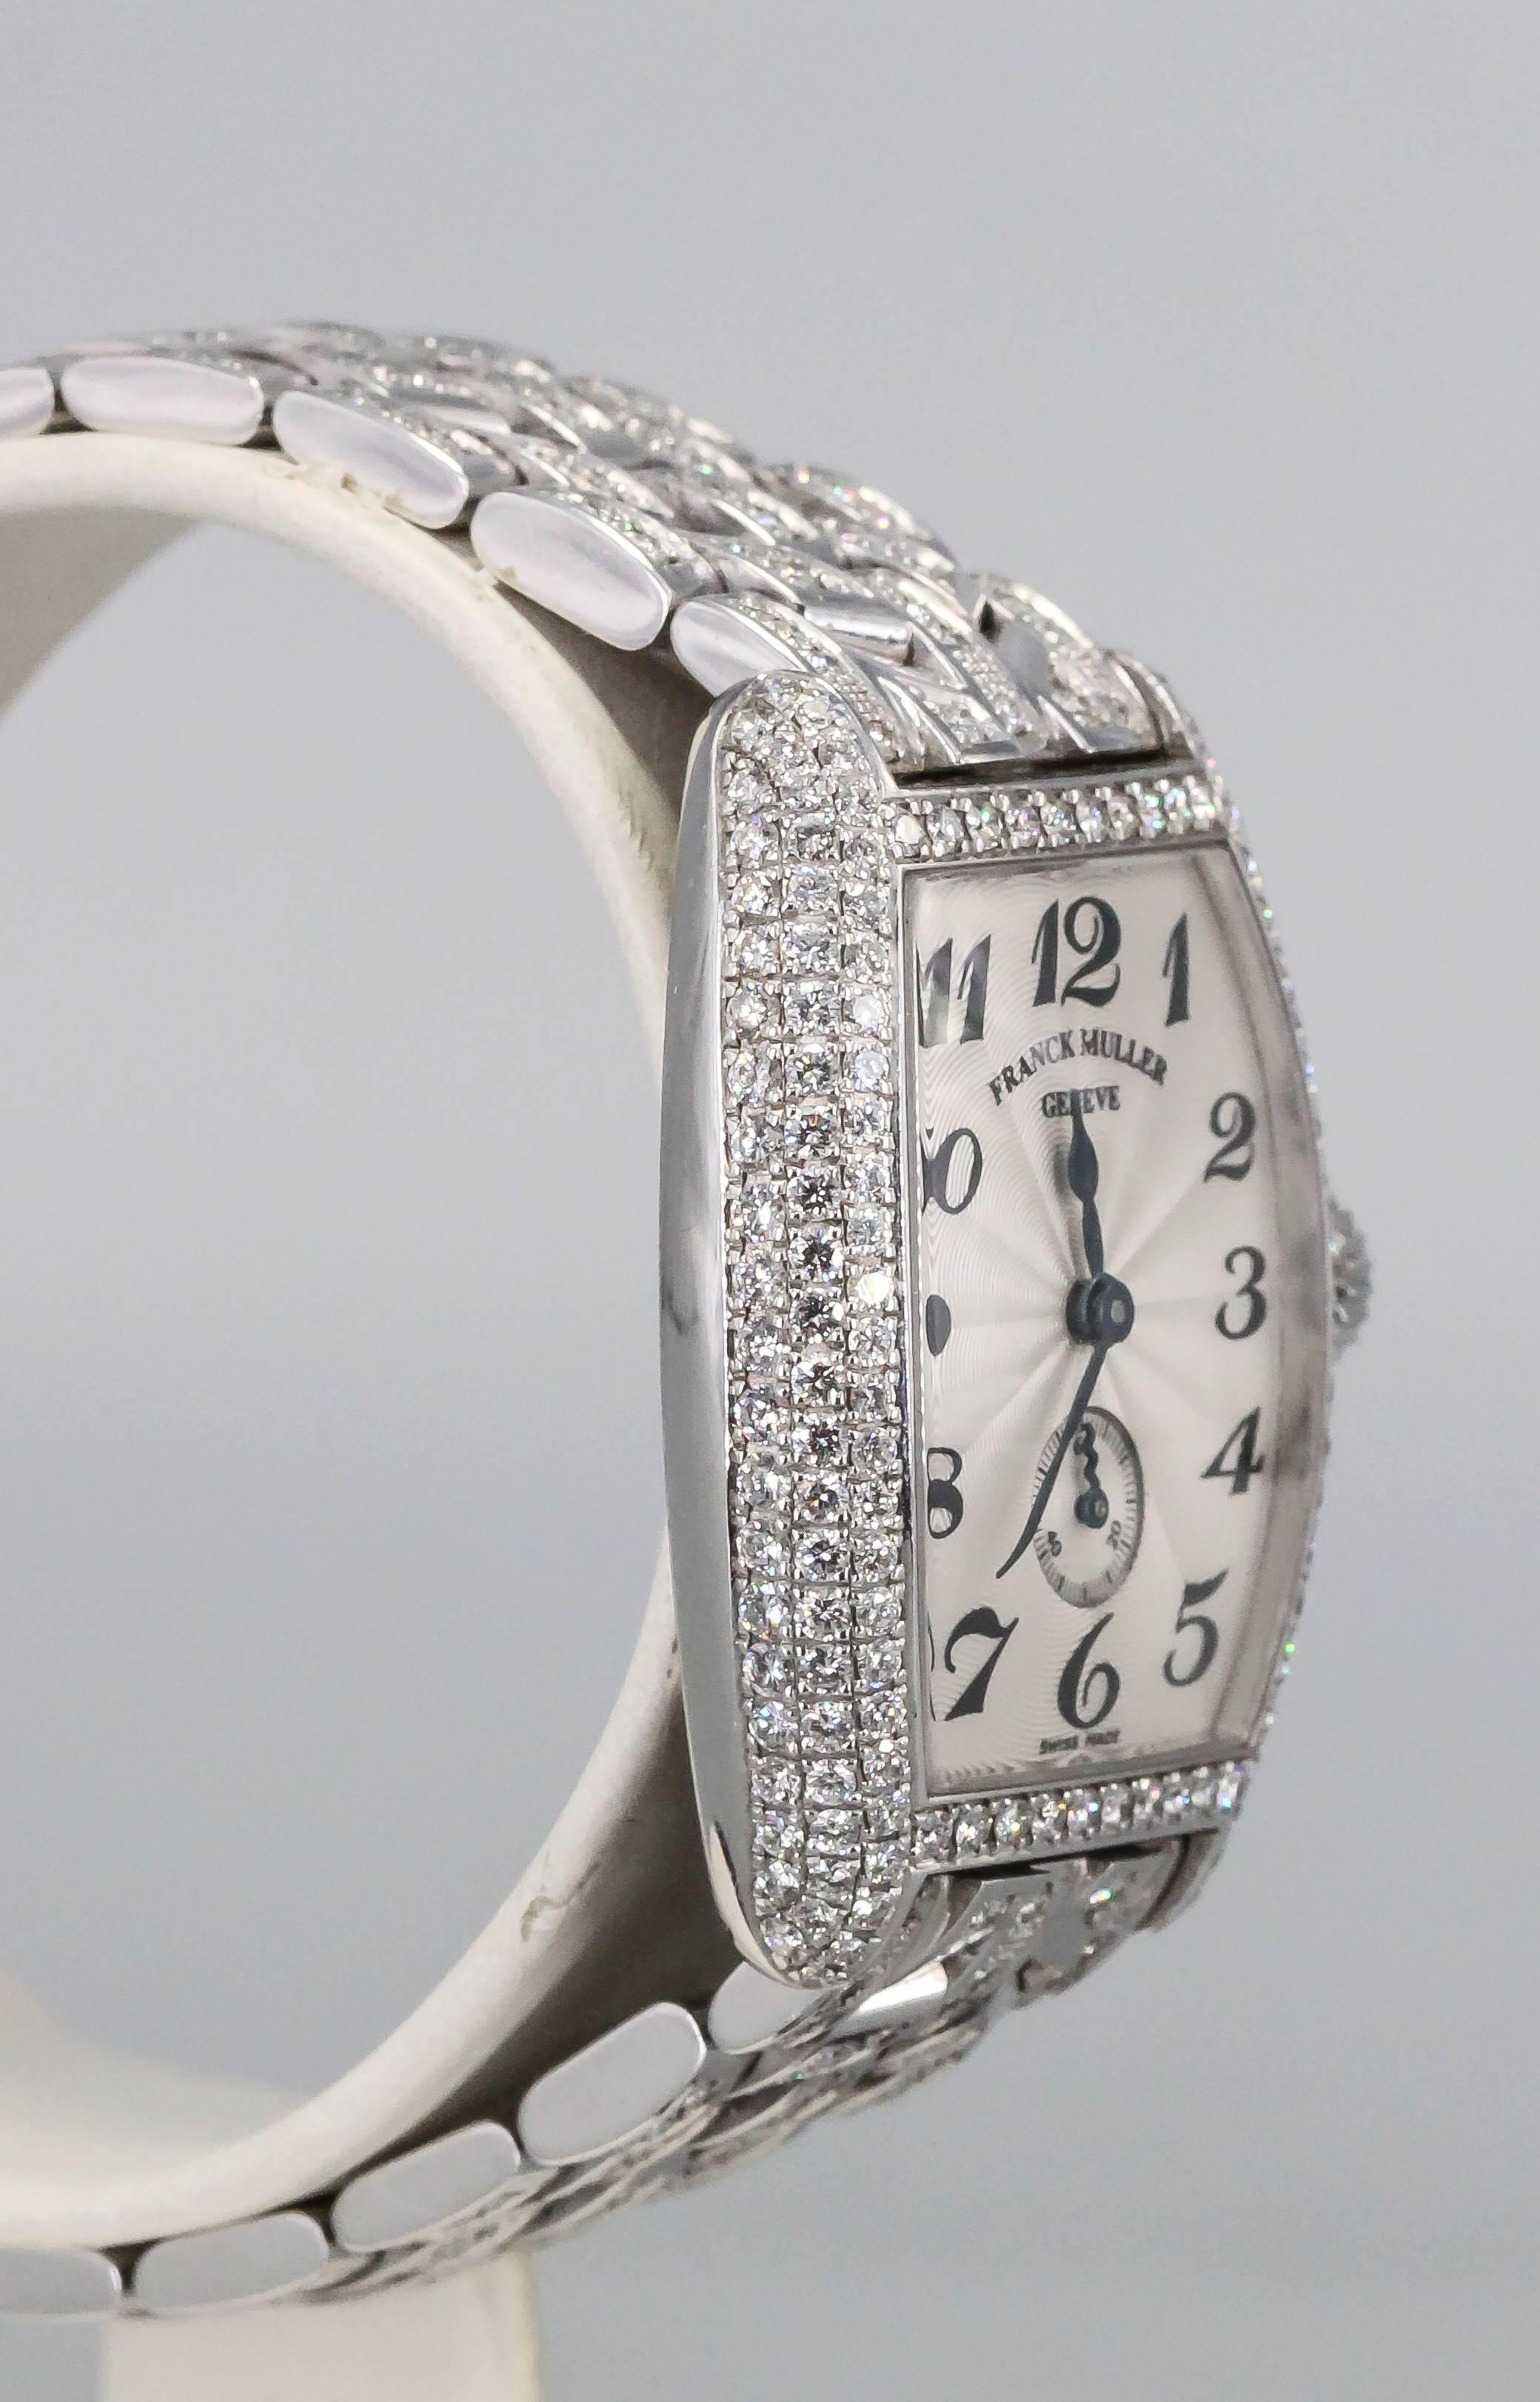 Elegant diamond and 18K white gold ladies wristwatch by Franck Muller. It features a full diamond bezel, loaded with high grade round brilliant cut diamonds, and along the matching bracelet. Manual wind movement and arabic numerals on the dial.